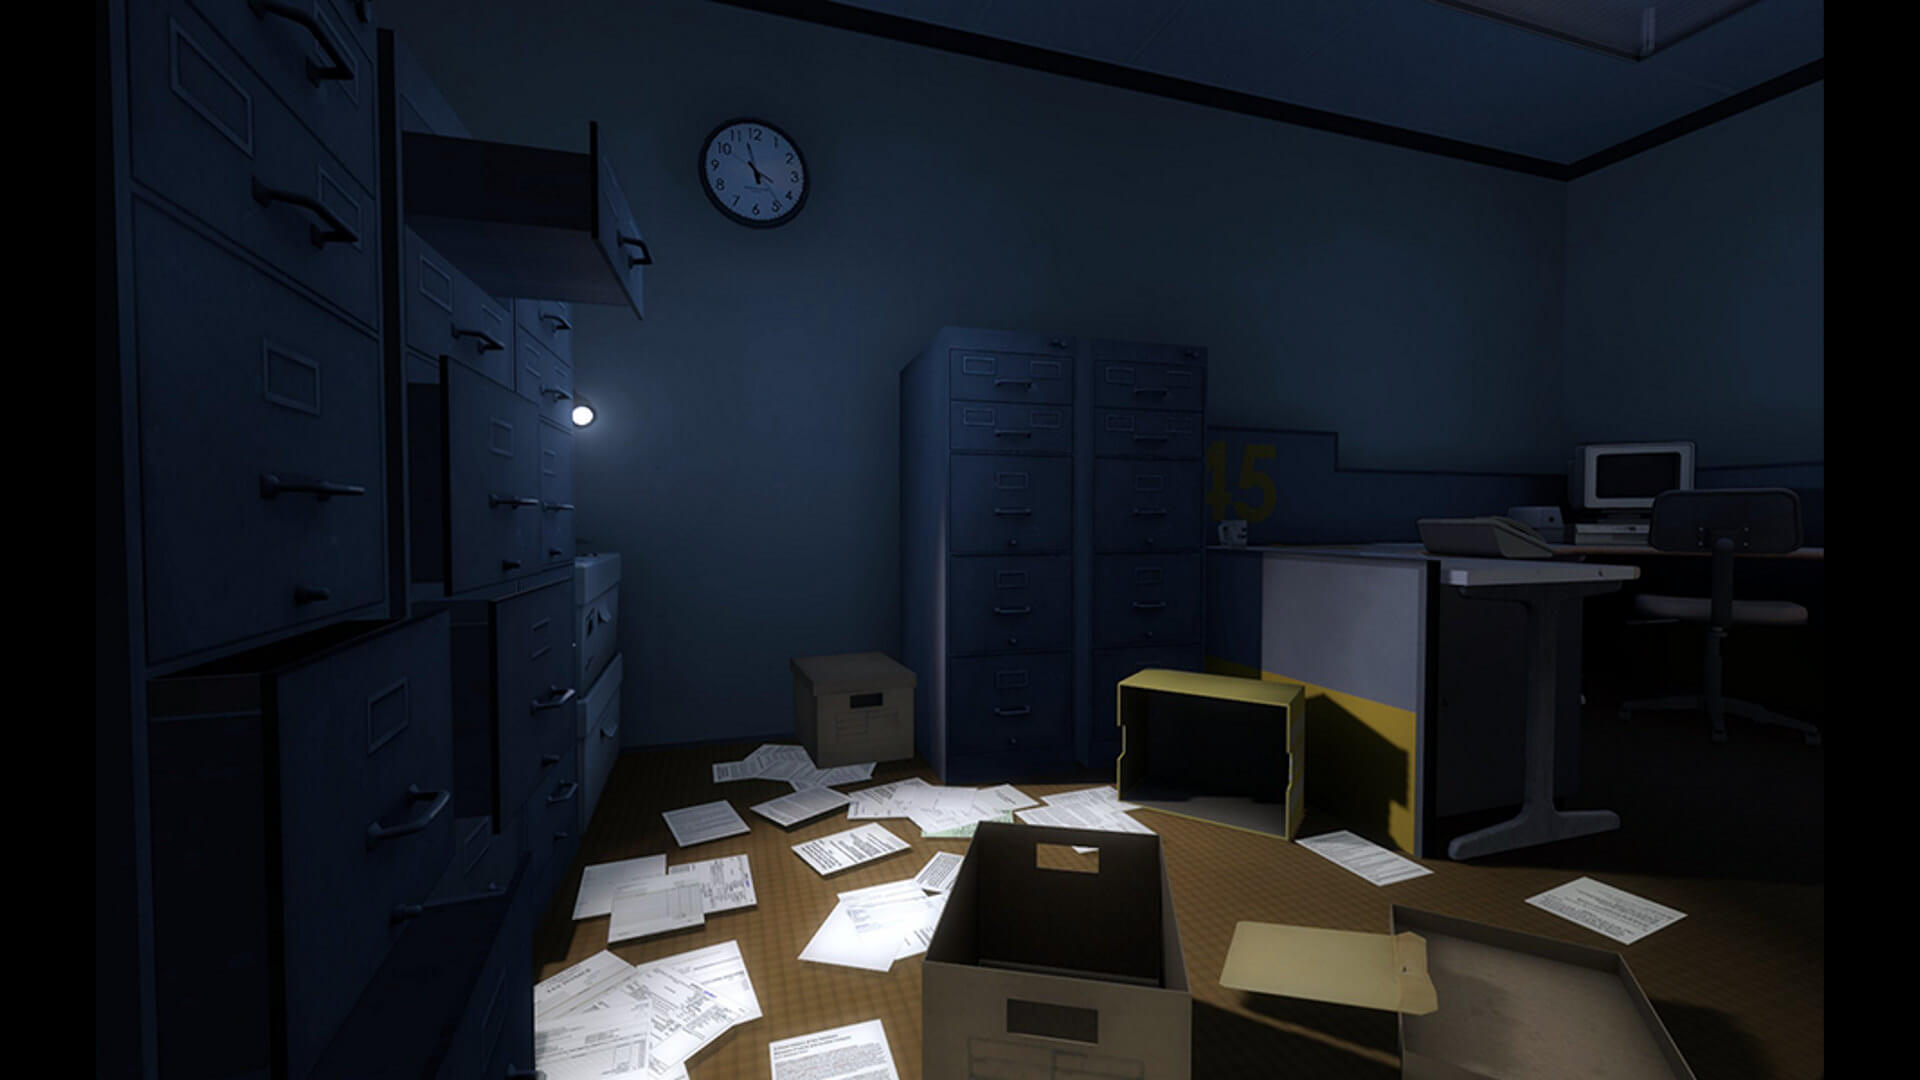 The Stanley Parable Screenshot